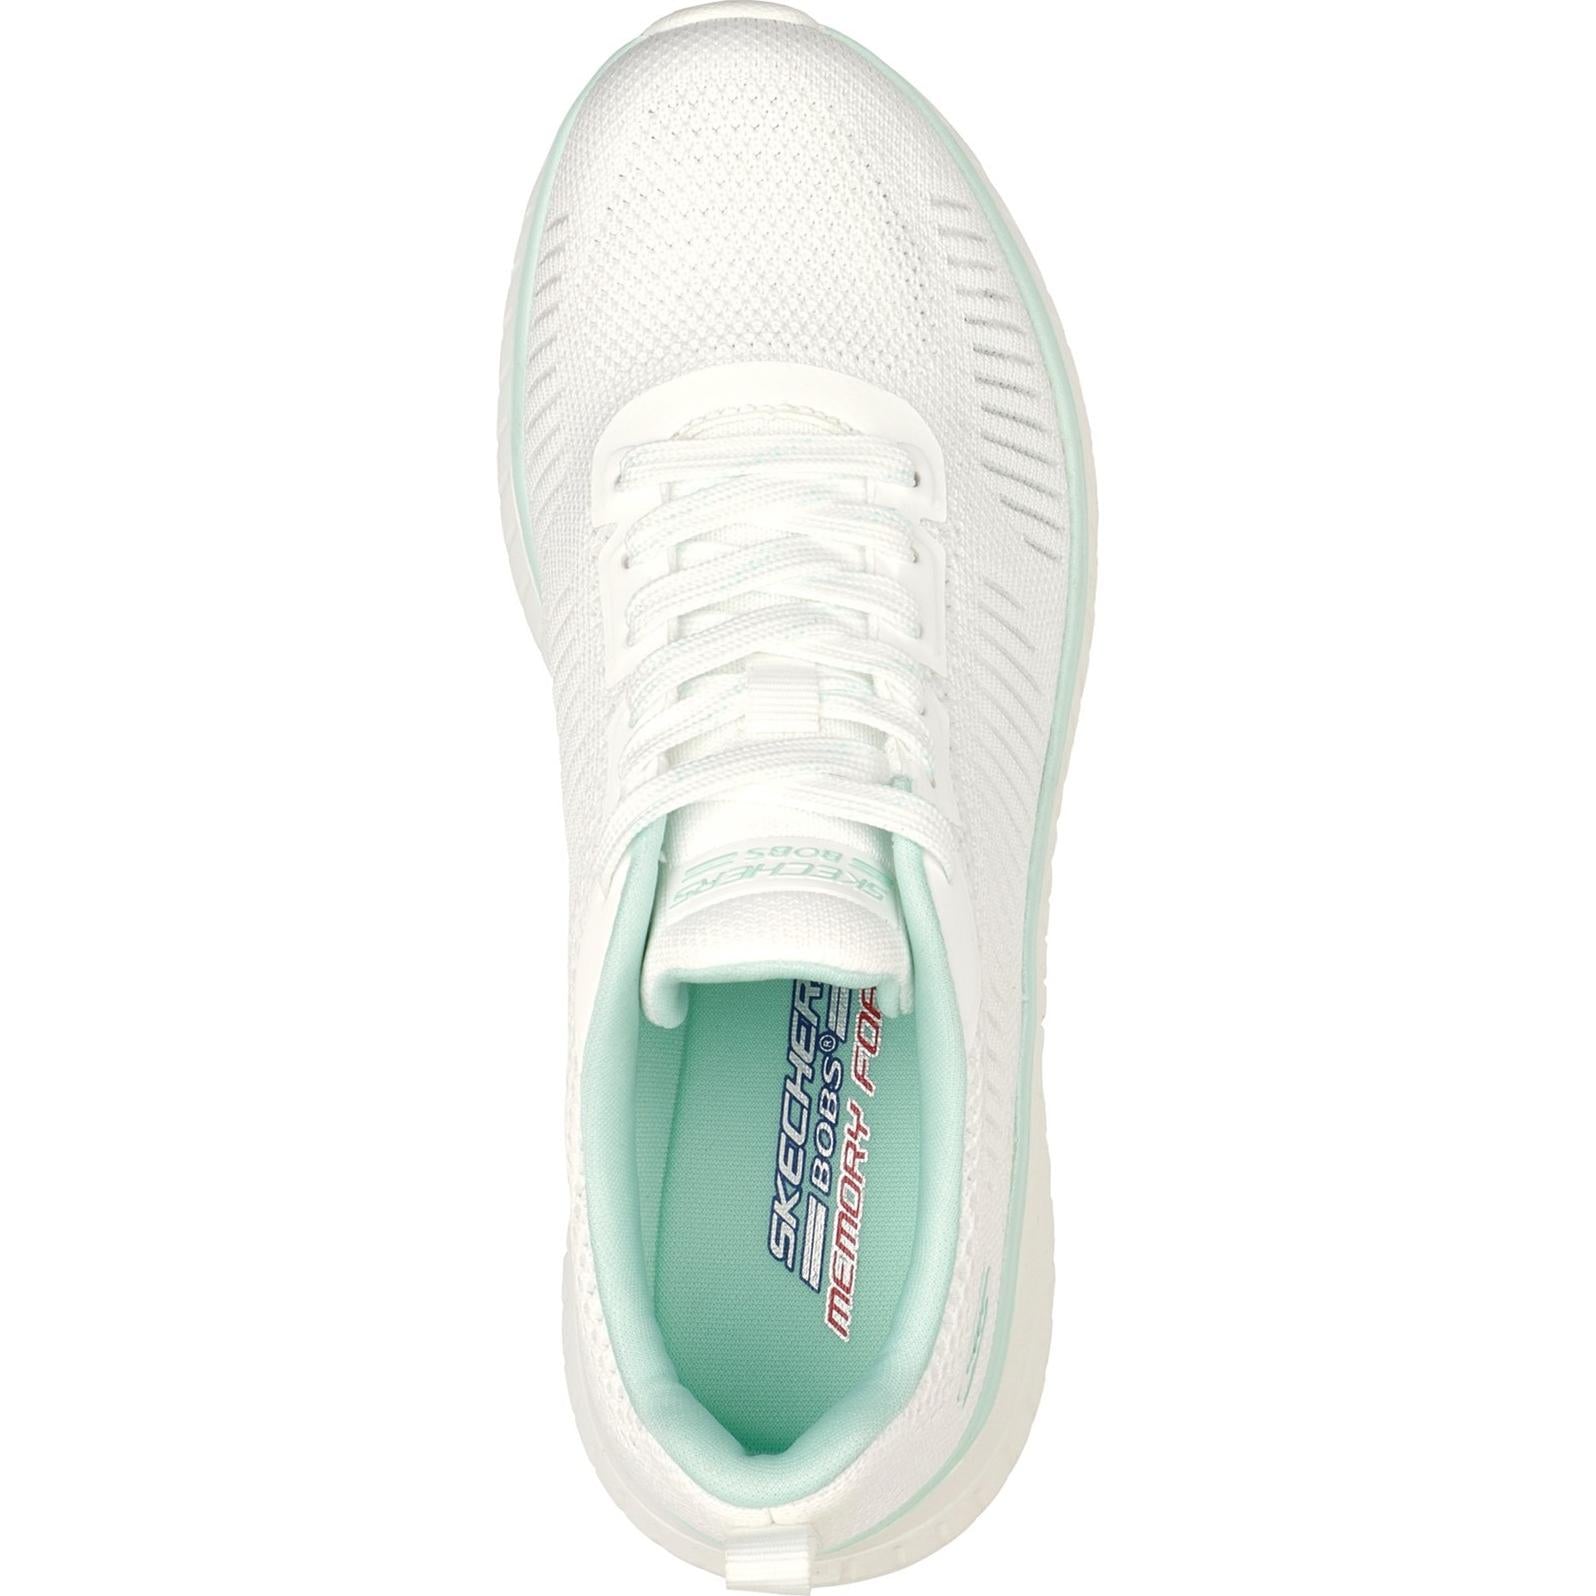 Skechers Bobs Squad Chaos Parallel Lines Trainers